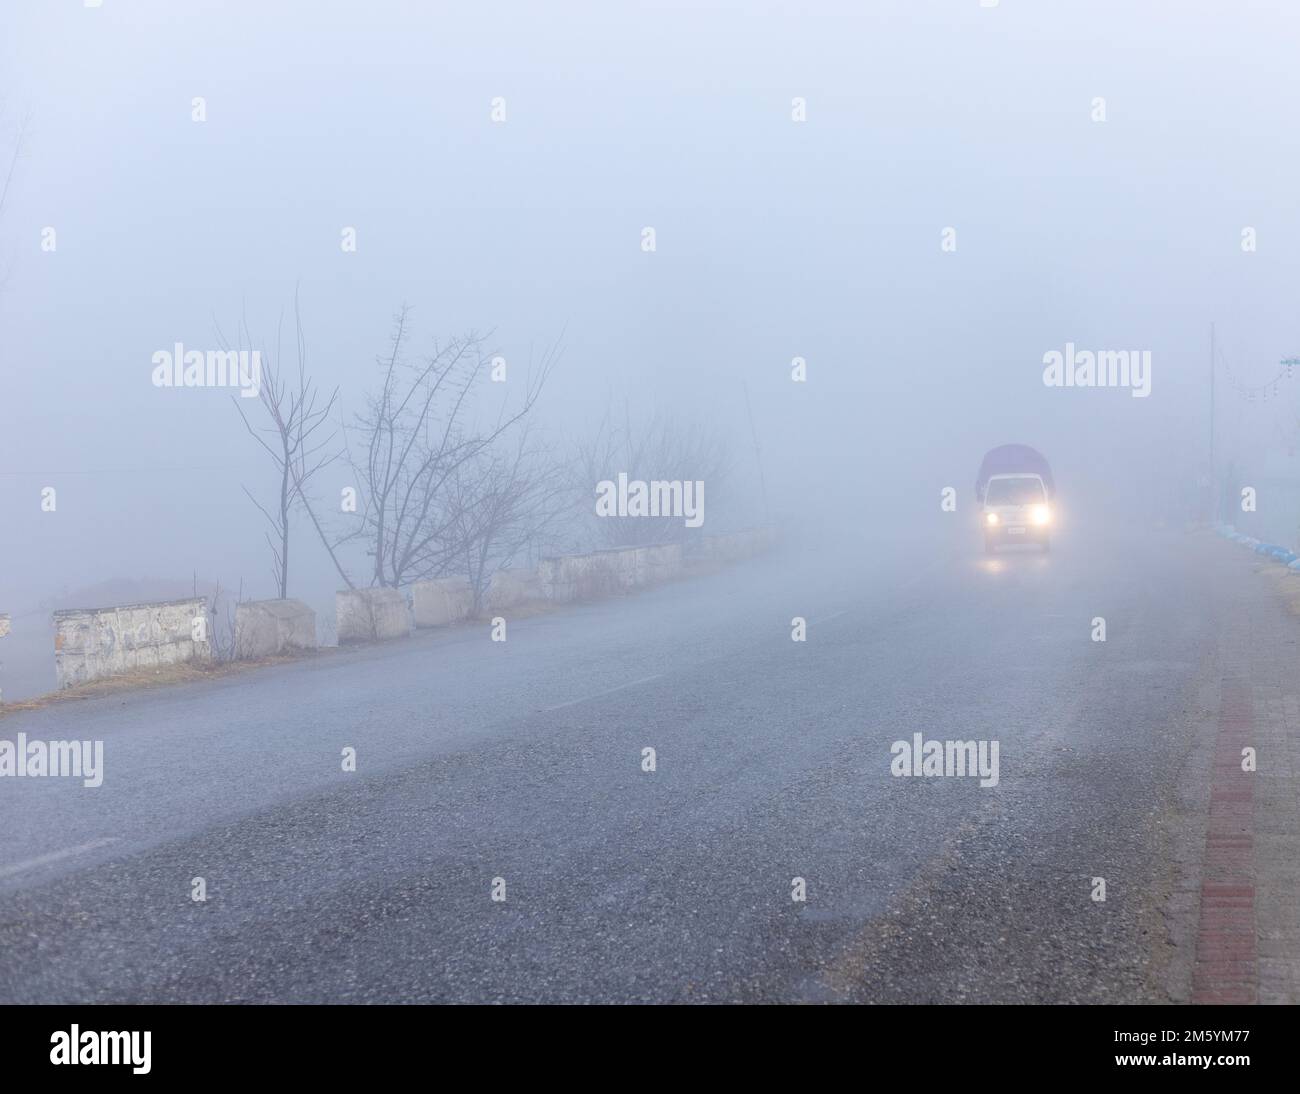 Low traffic on a road in a foggy weather with low visibility Stock Photo